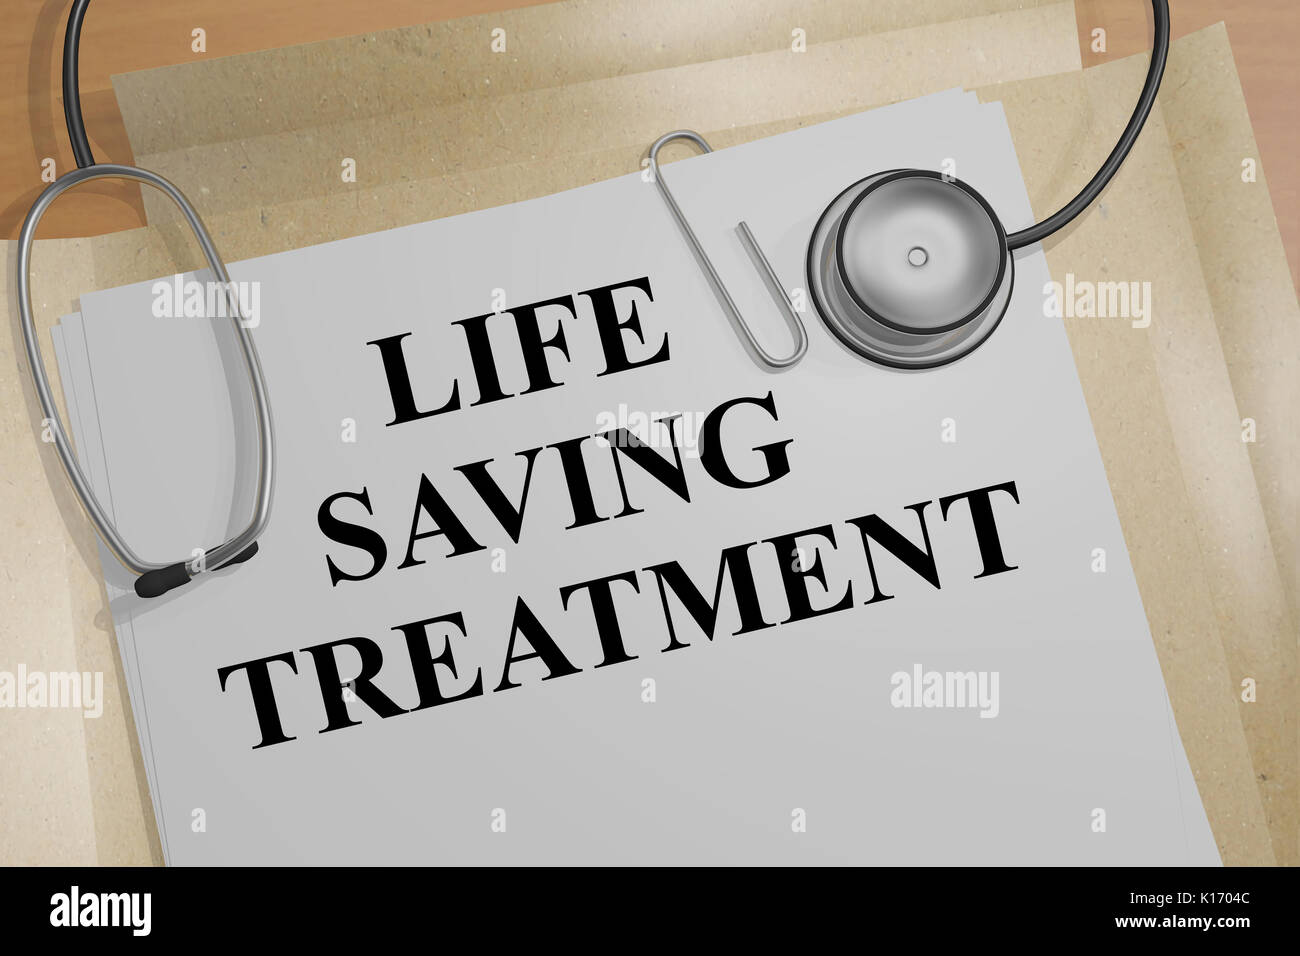 3D illustration of 'LIFE SAVING TREATMENT' title on a document Stock Photo